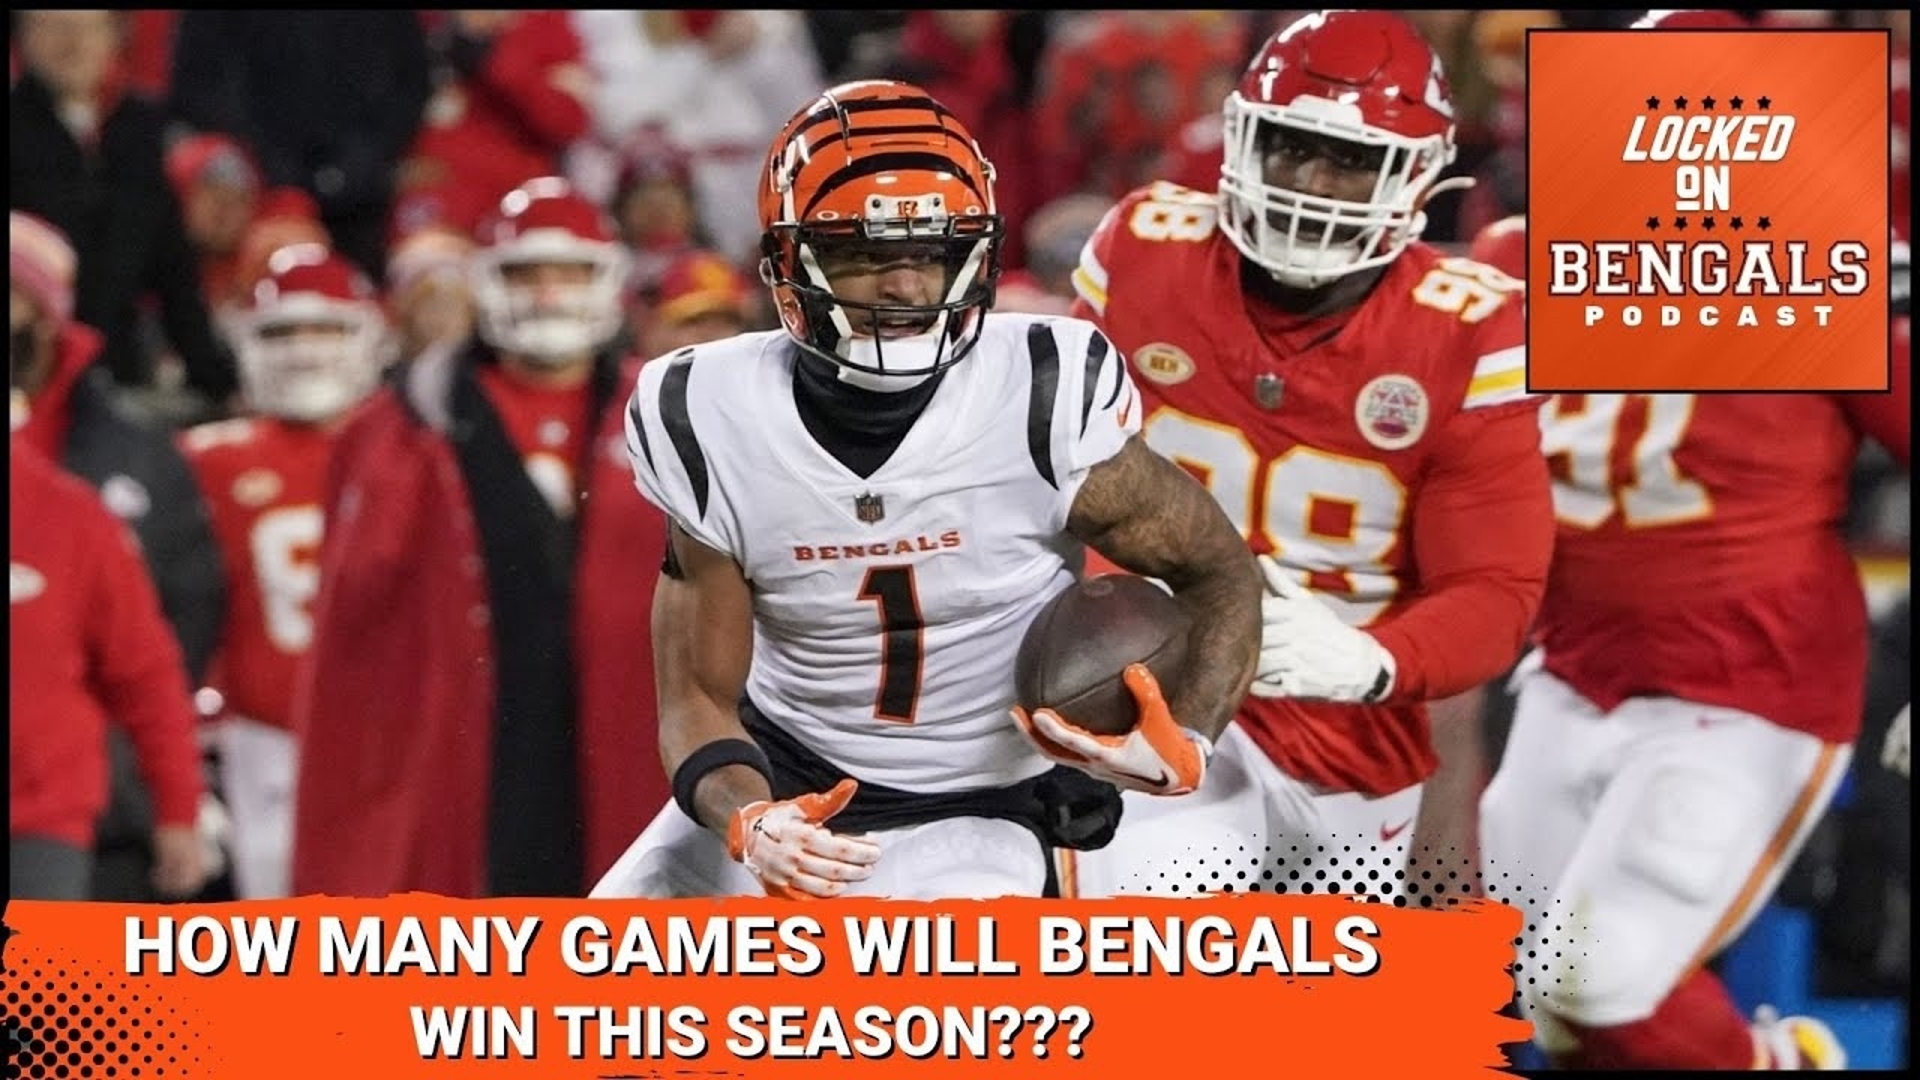 The Cincinnati Bengals are hoping to return to the playoffs this season. Will they?